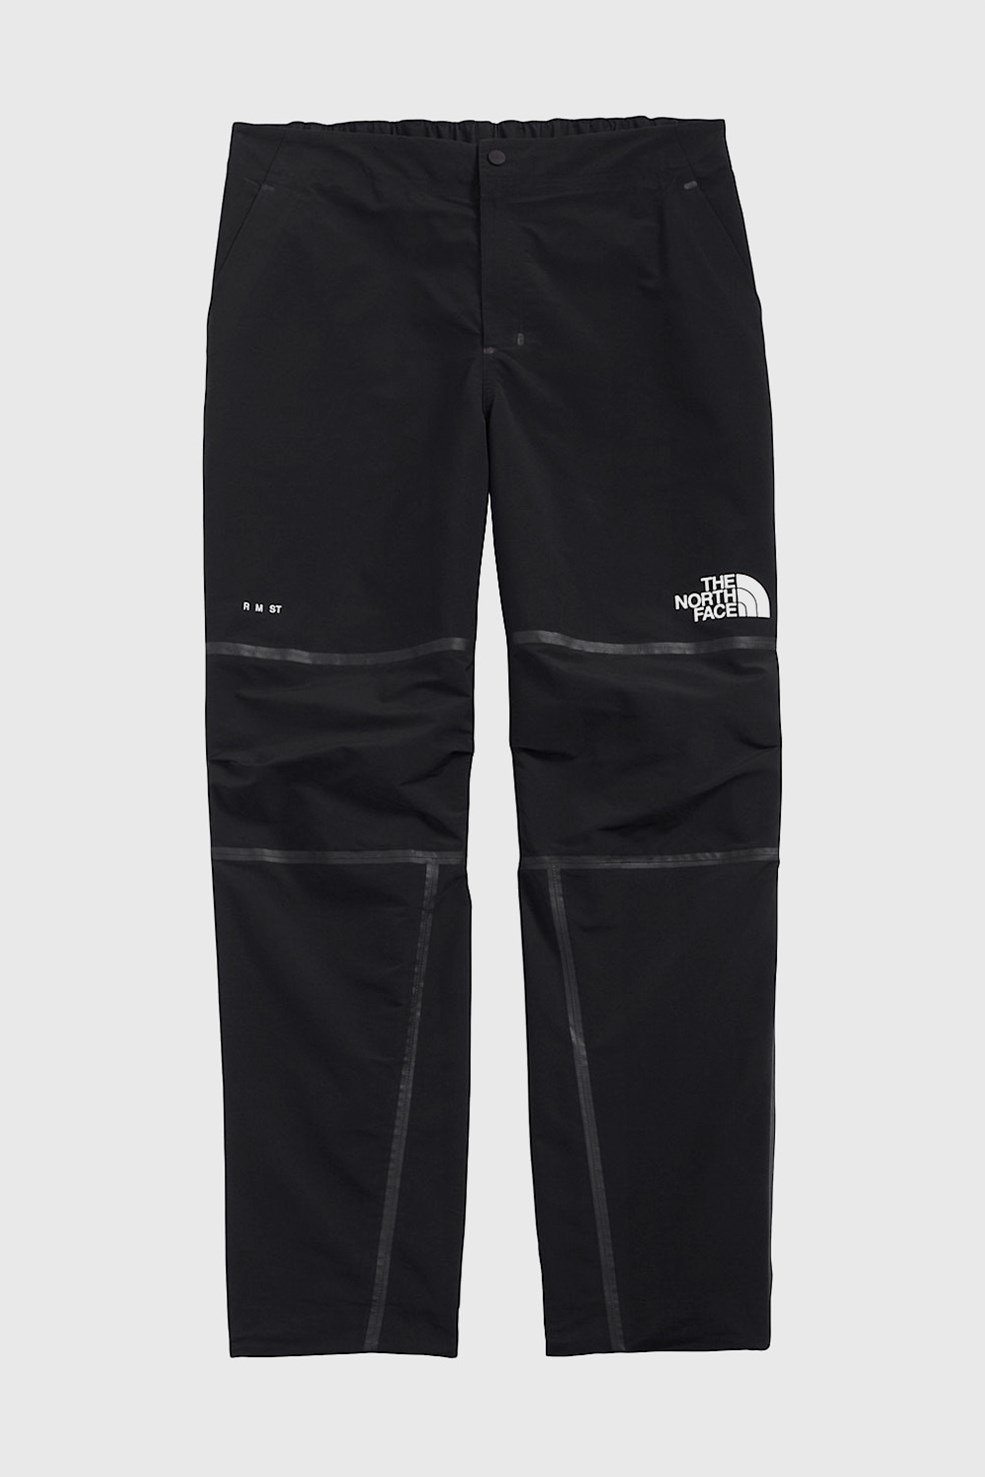 The North Face M RMST Mountain Pant Tnf black | WoodWood.com